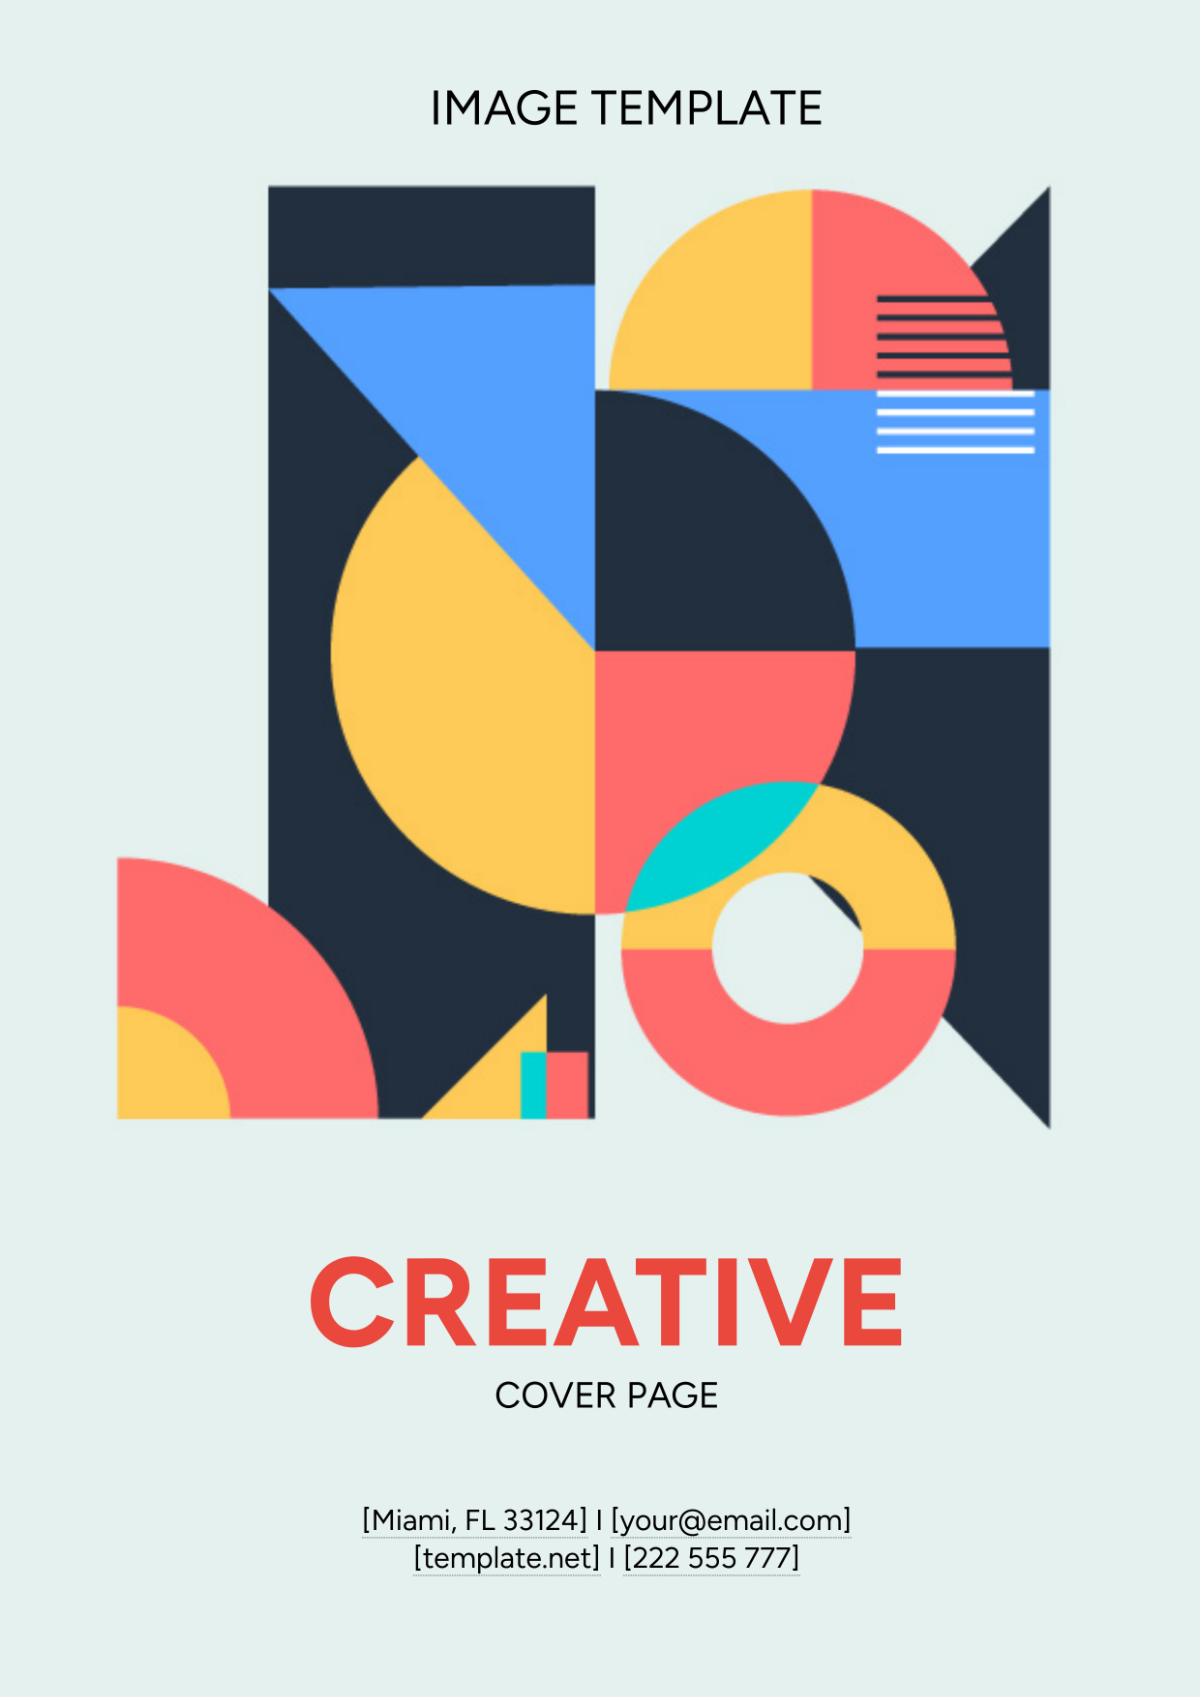 Creative Cover Page Image Template